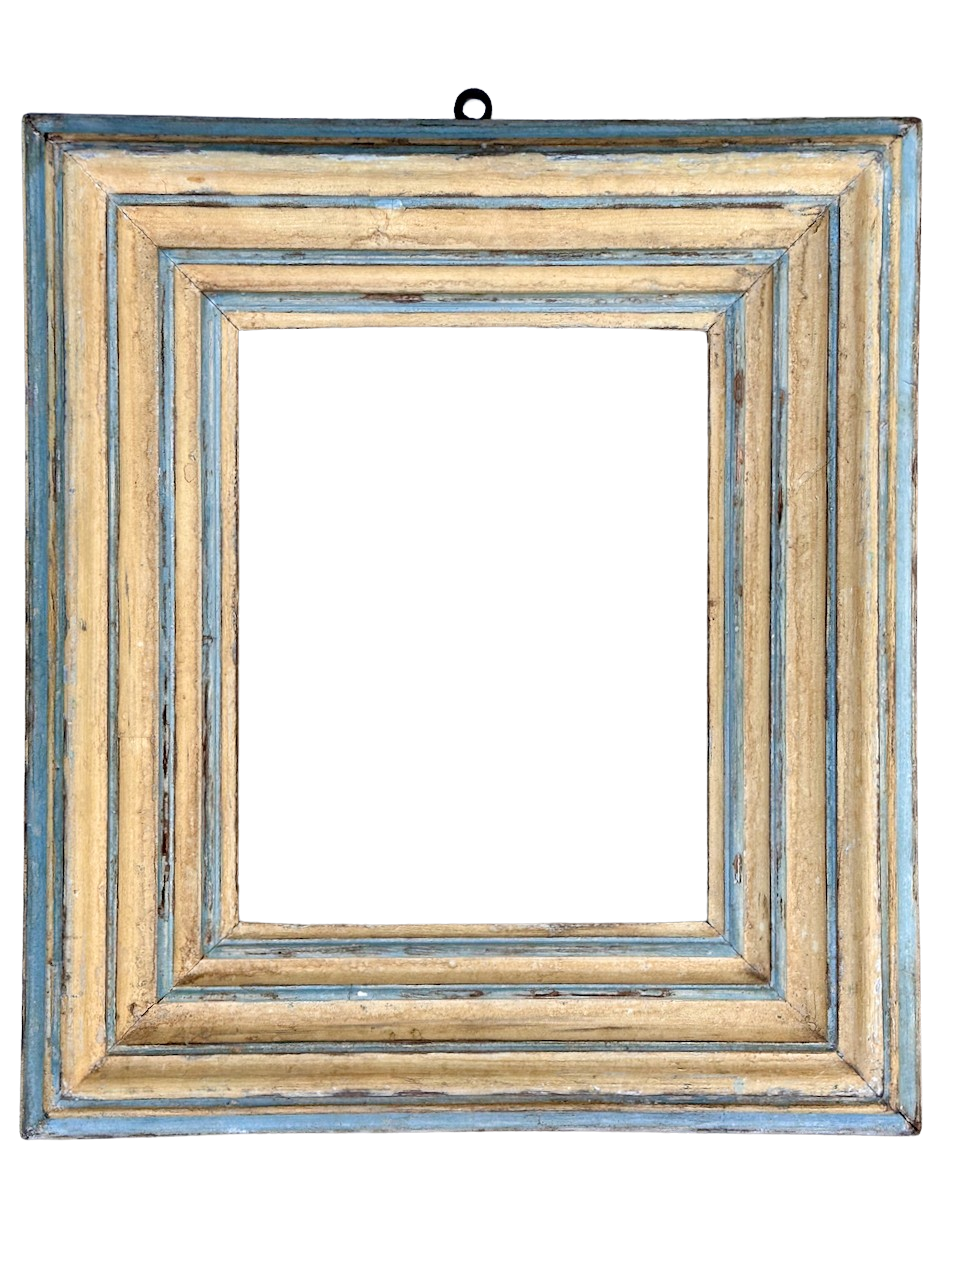 Italian 18th Century carved, stepped frame having original pale blue and yellow polychrome